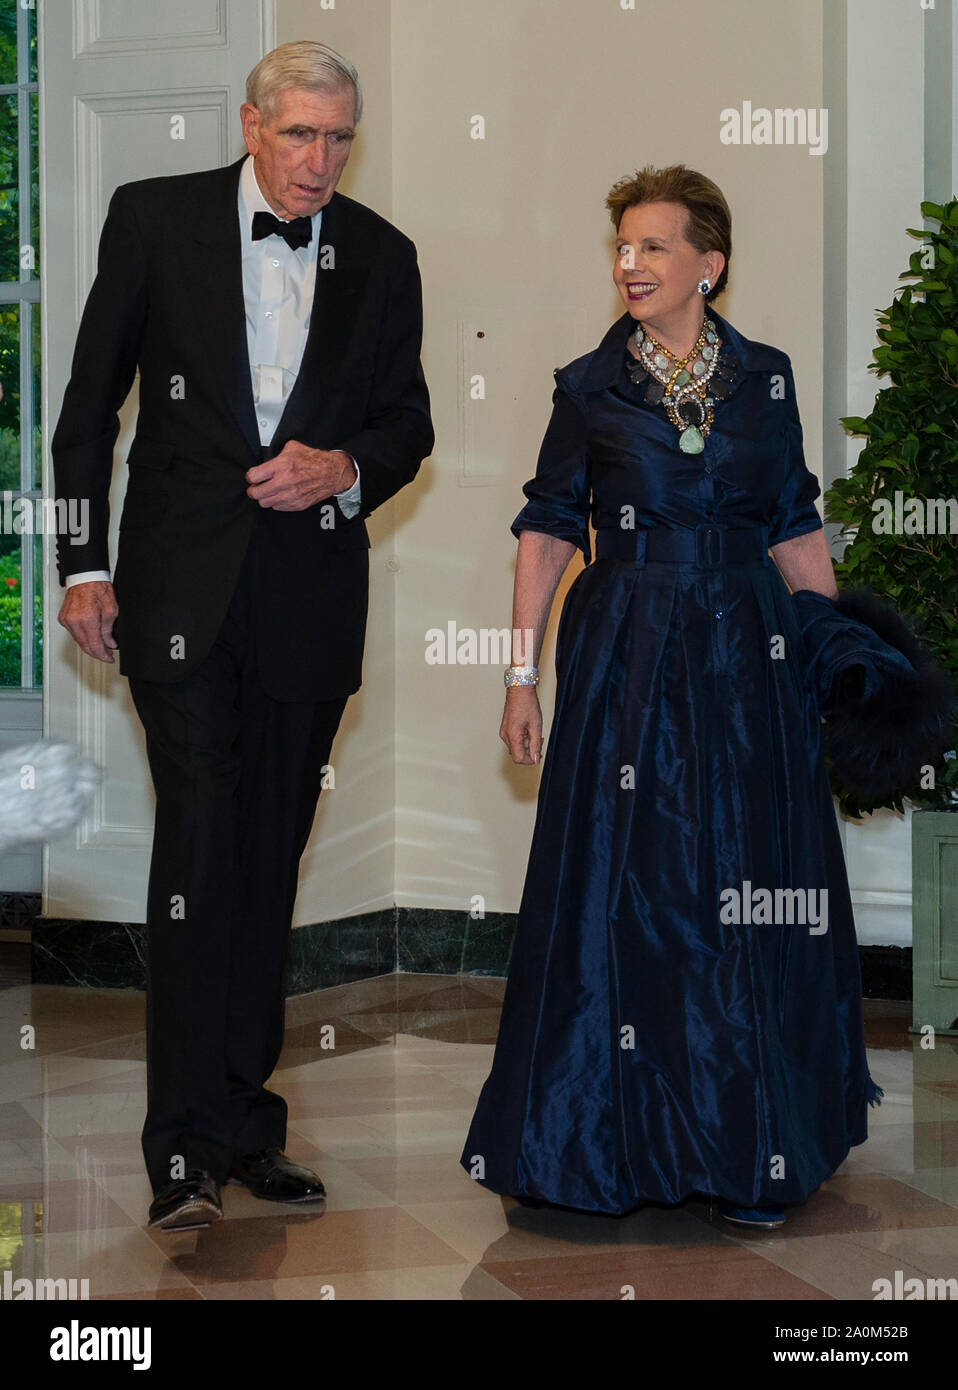 Washington, United States Of America. 20th Sep, 2019. Adrienne Arsht and C. Boyden Gray arrive for the State Dinner hosted by United States President Donald J. Trump and First lady Melania Trump in honor of Prime Minister Scott Morrison of Australia and his wife, Jenny Morrison, at the White House in Washington, DC on Friday, September 20, 2019.Credit: Ron Sachs/Pool via CNP | usage worldwide Credit: dpa/Alamy Live News Stock Photo